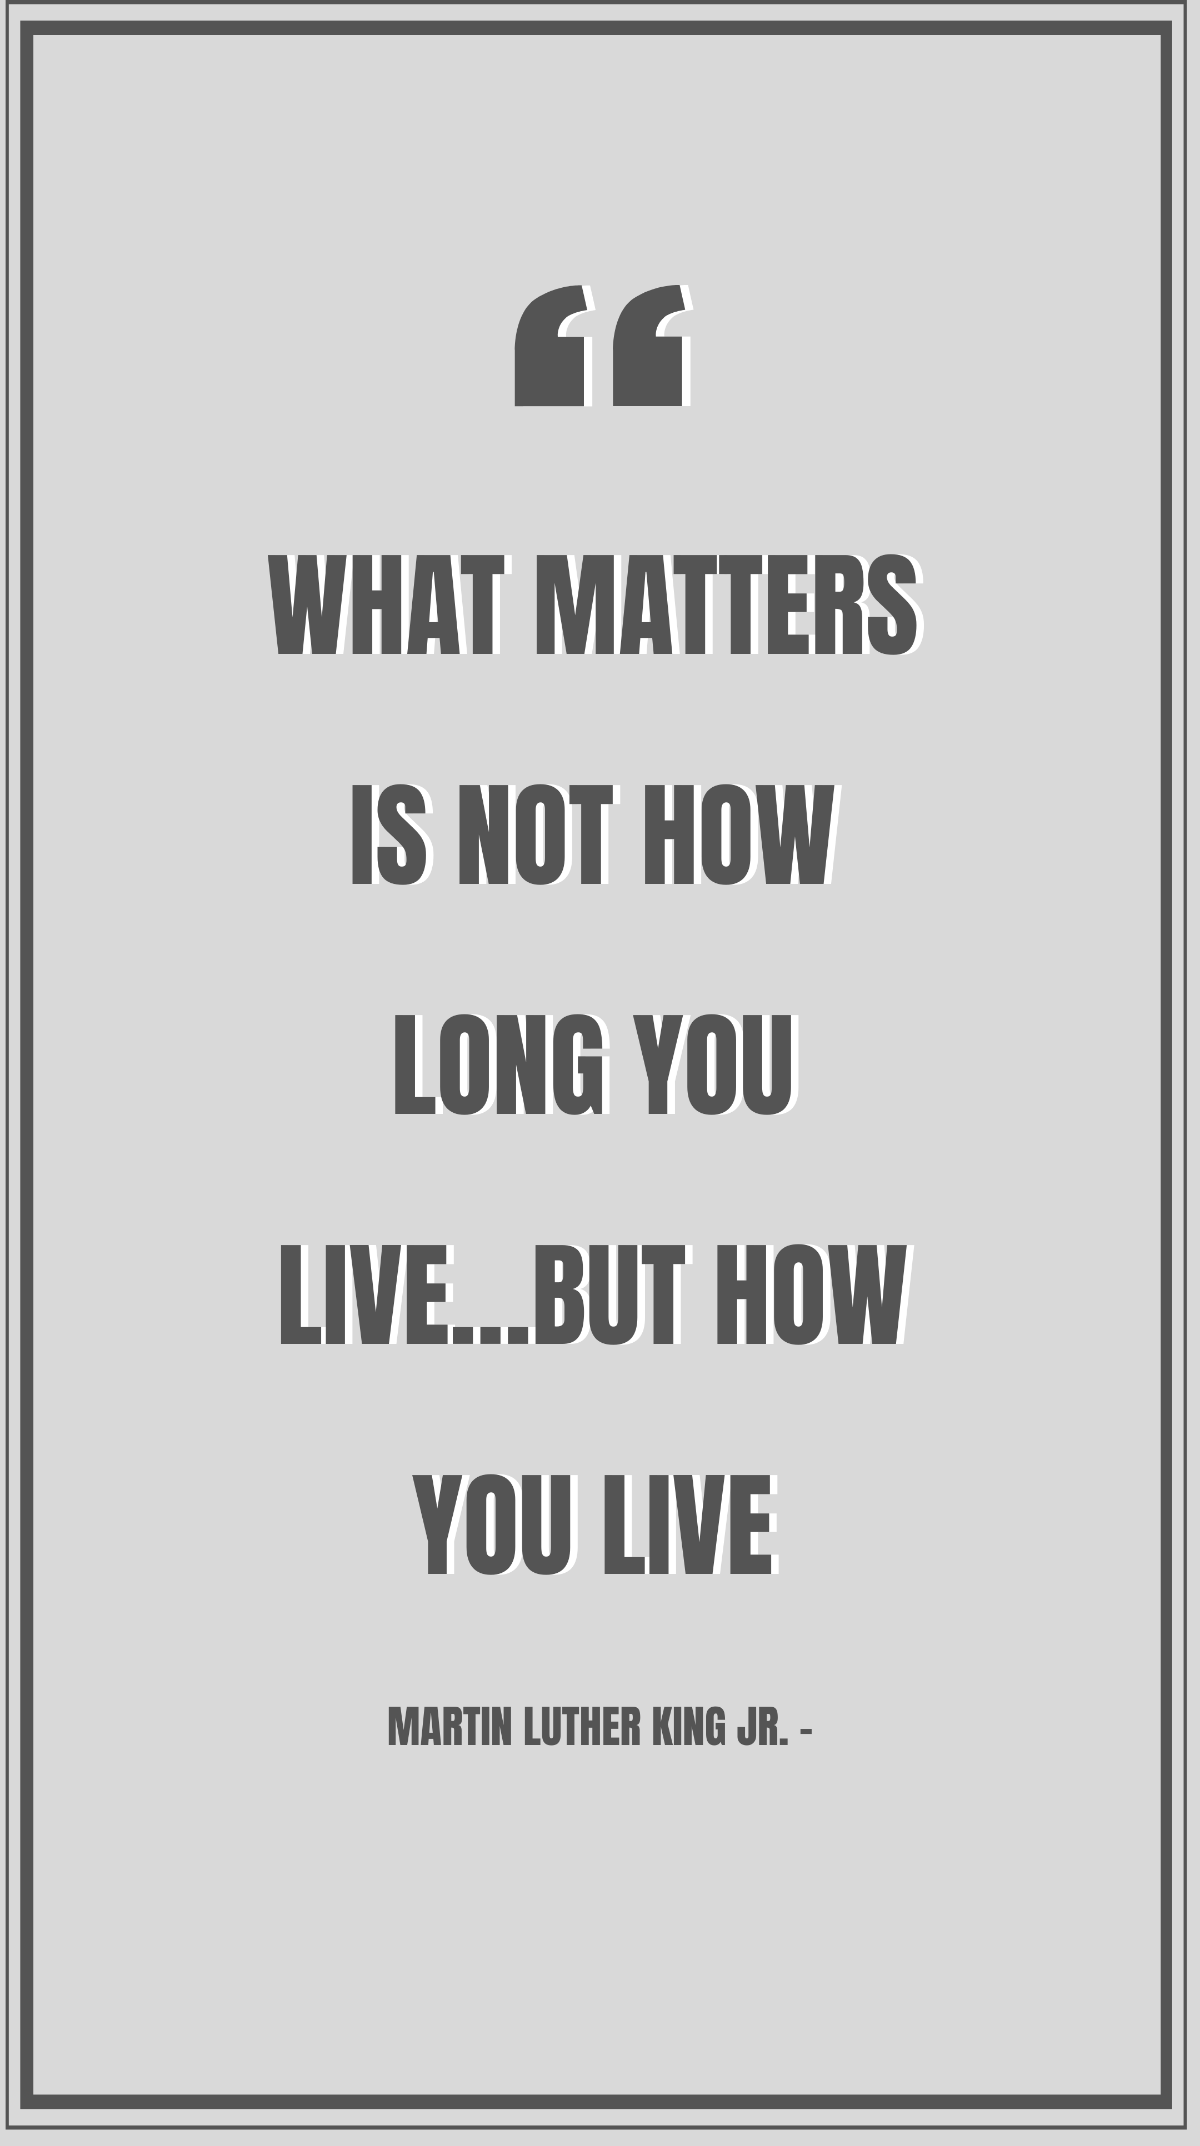 Martin Luther King Jr. - What matters is not how long you live…but how you live